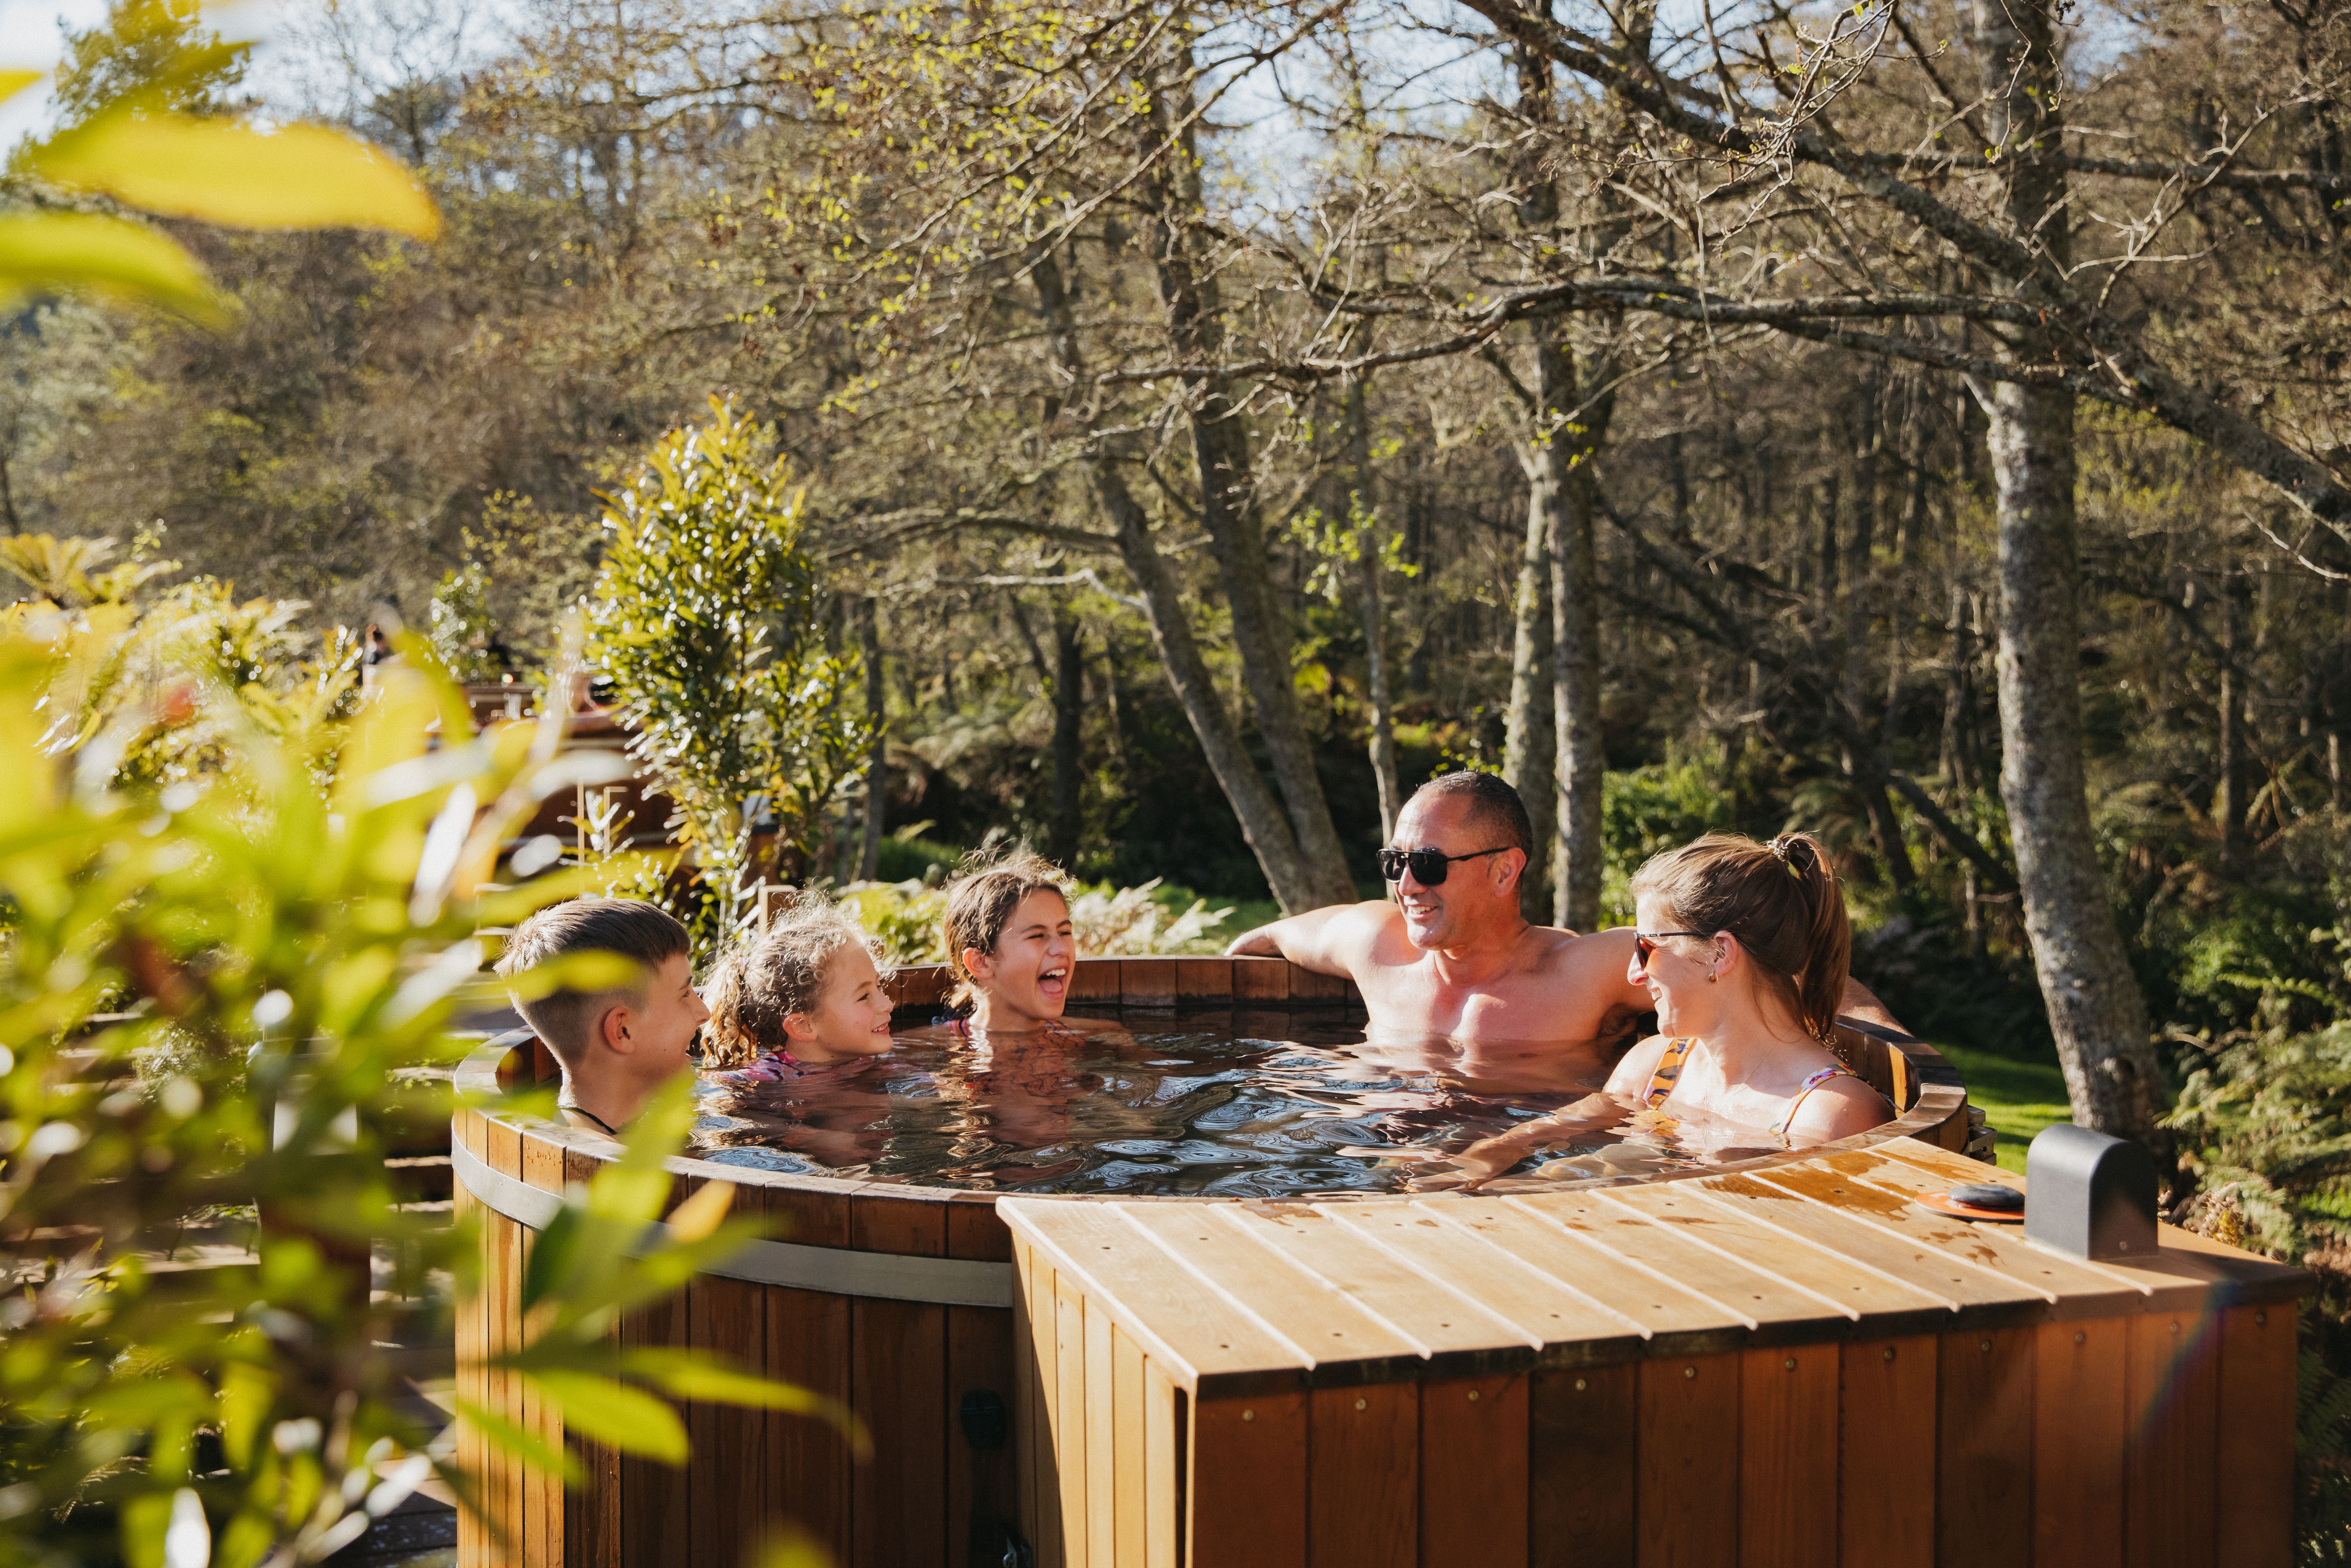 Hot tub family laughing